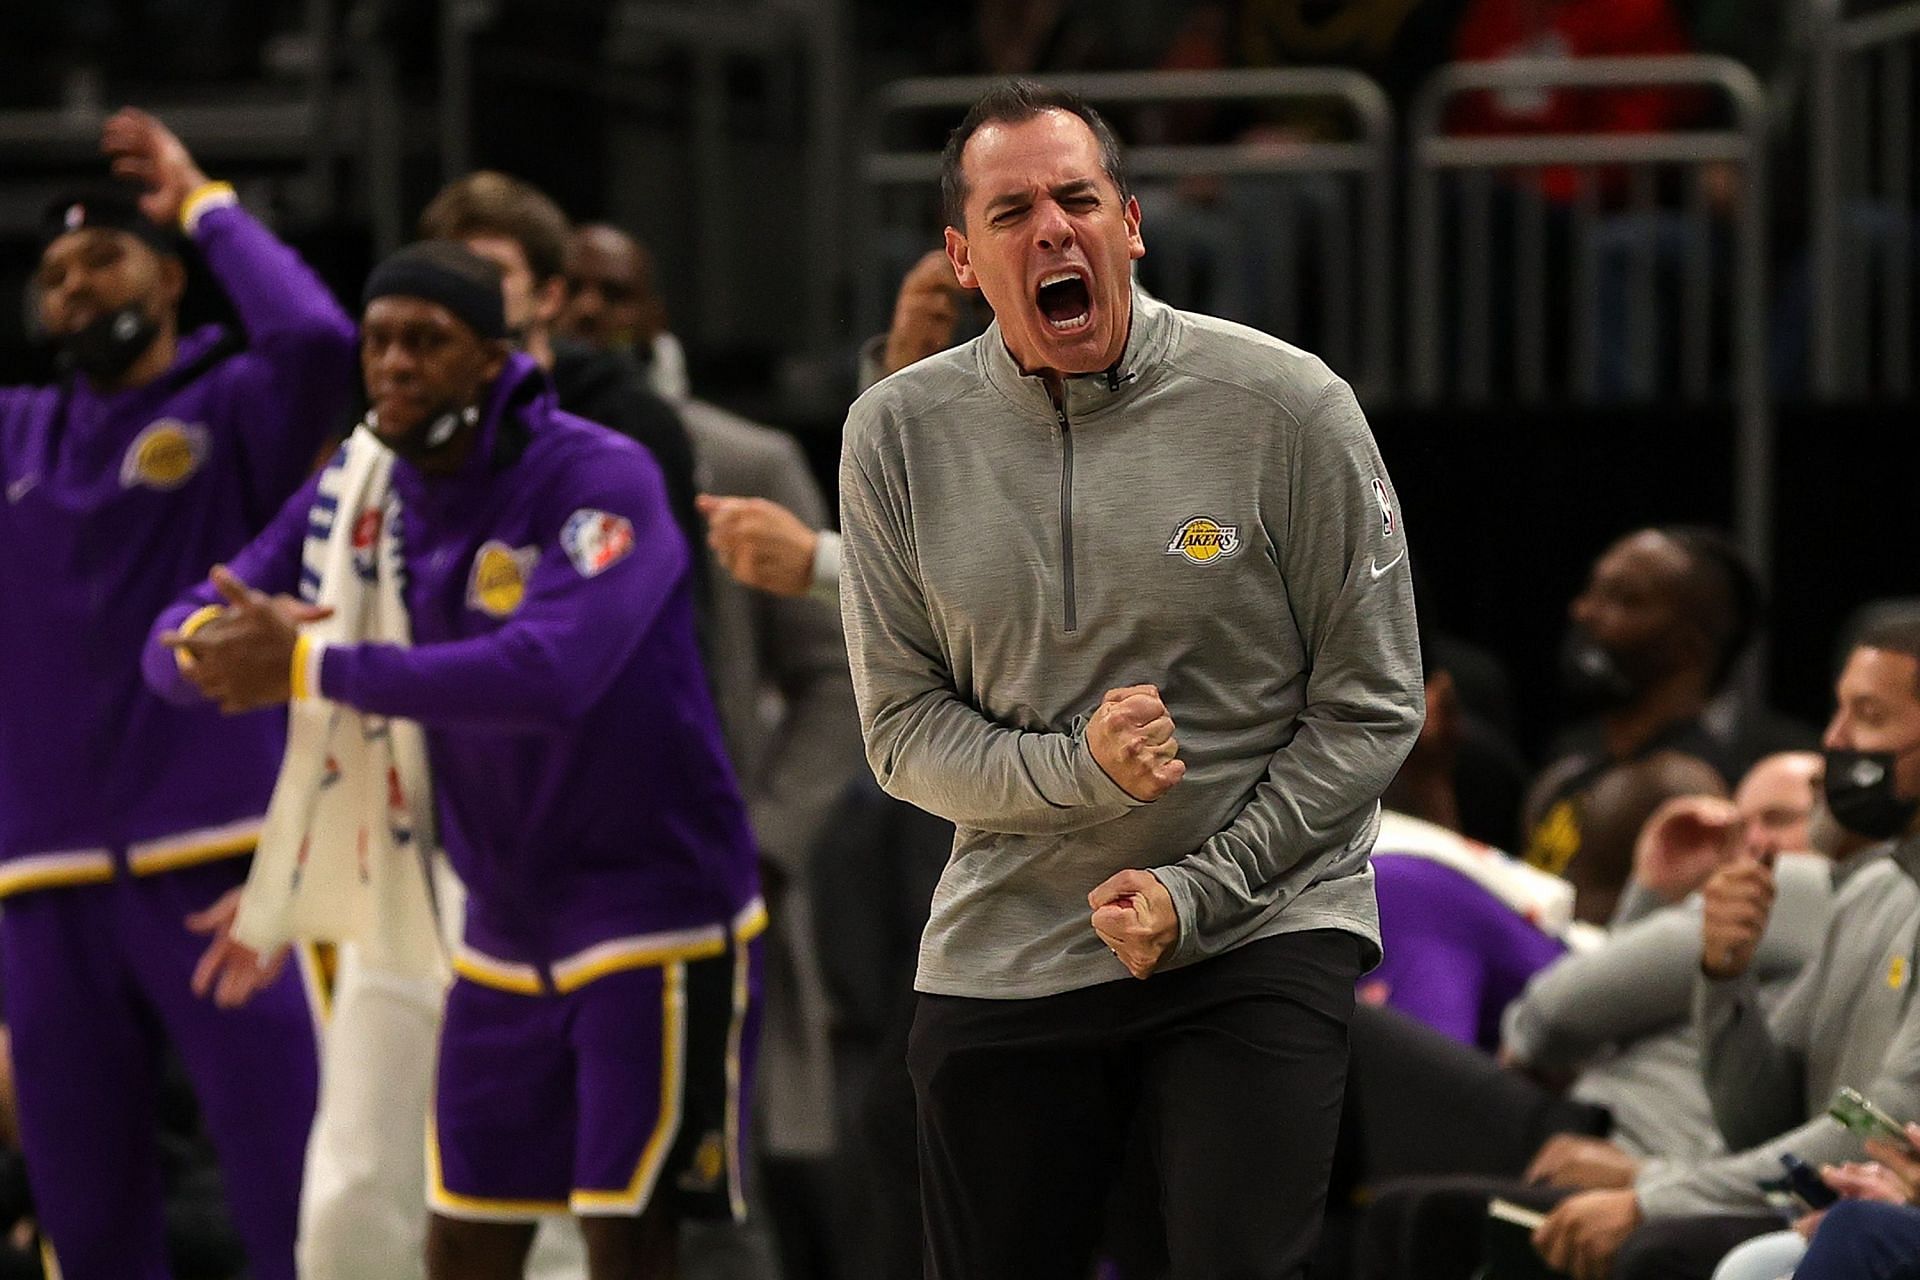 LA Lakers head coach Frank Vogel was upset that Anthony Davis did not get a single free-throw attempt against the Milwaukee Bucks